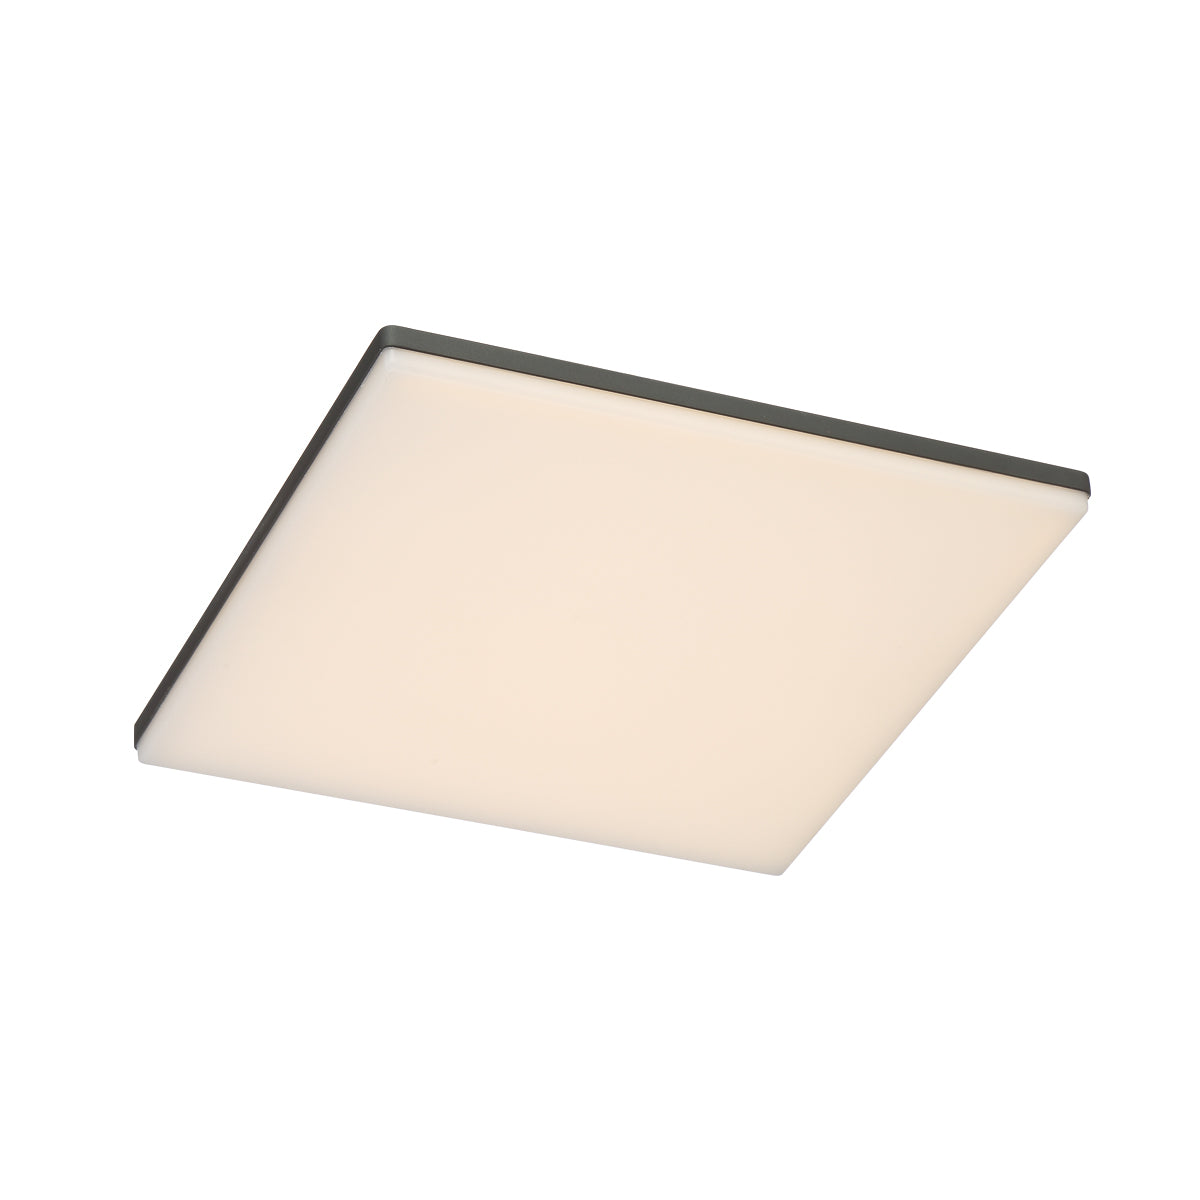 34117 Outdoor sconce Aluminum - 34117-019 INTEGRATED LED | EUROFASE